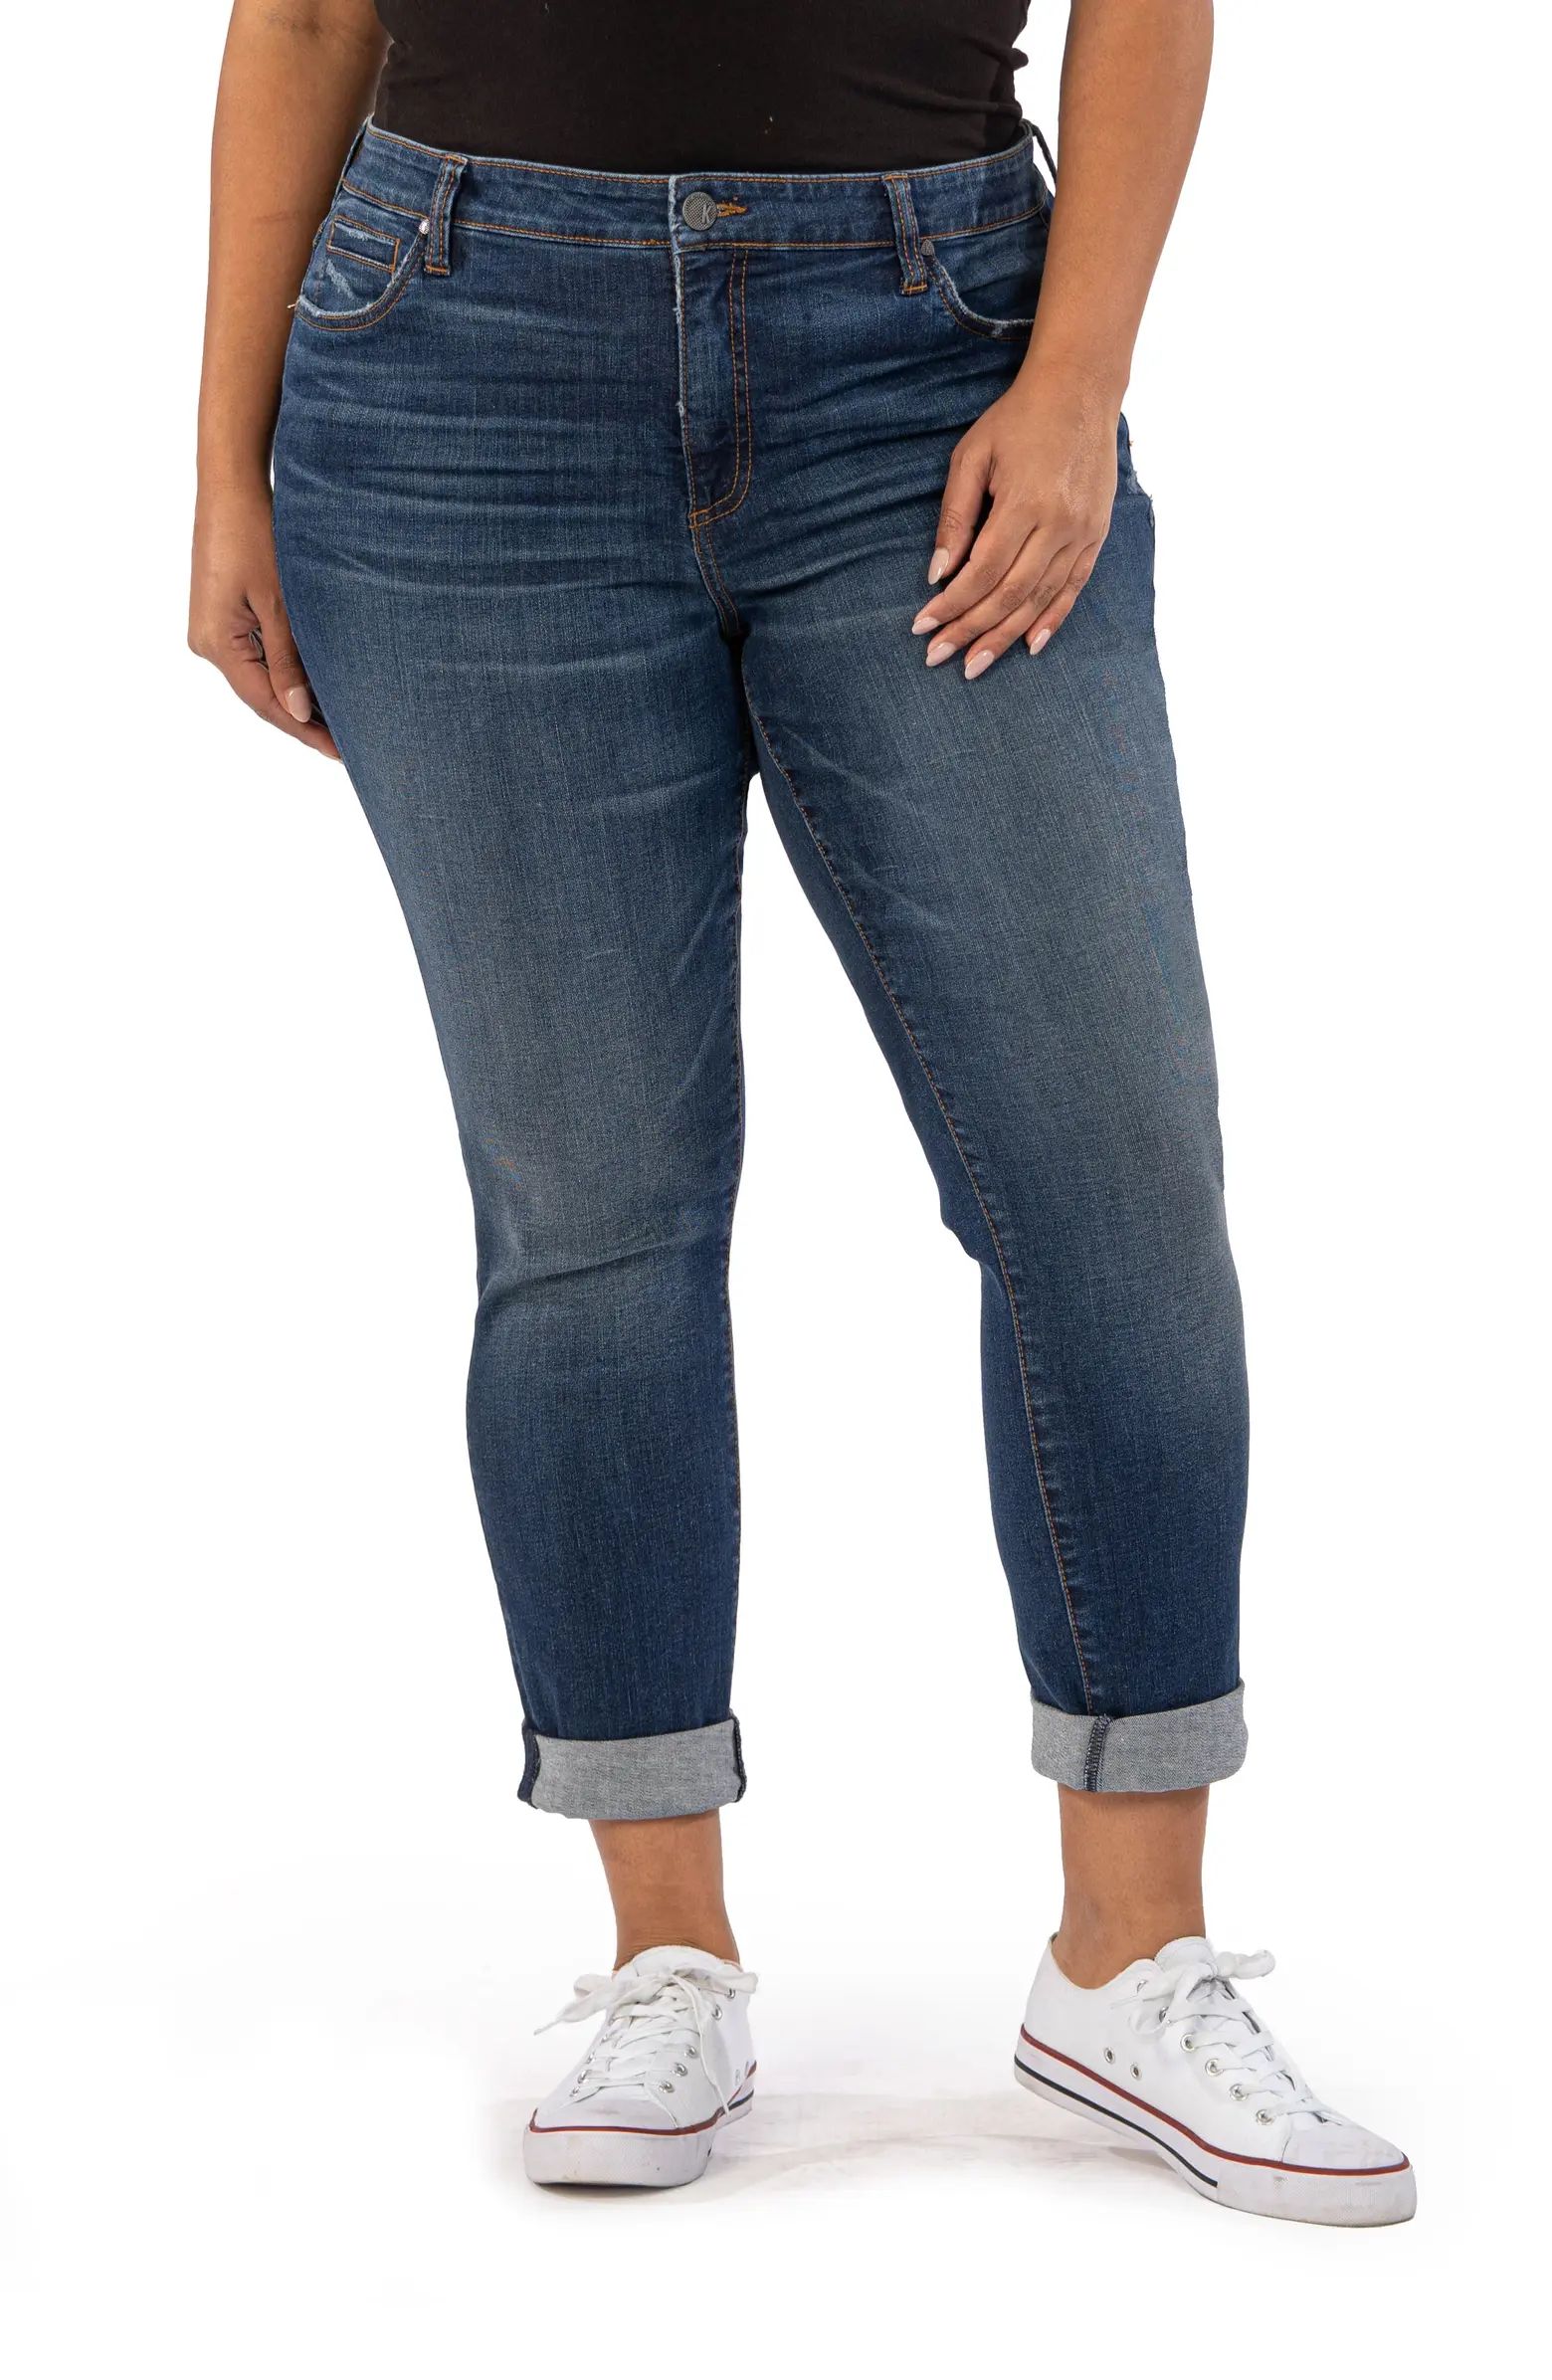 KUT from the Kloth Catherine Boyfriend Jeans | Nordstrom | Nordstrom